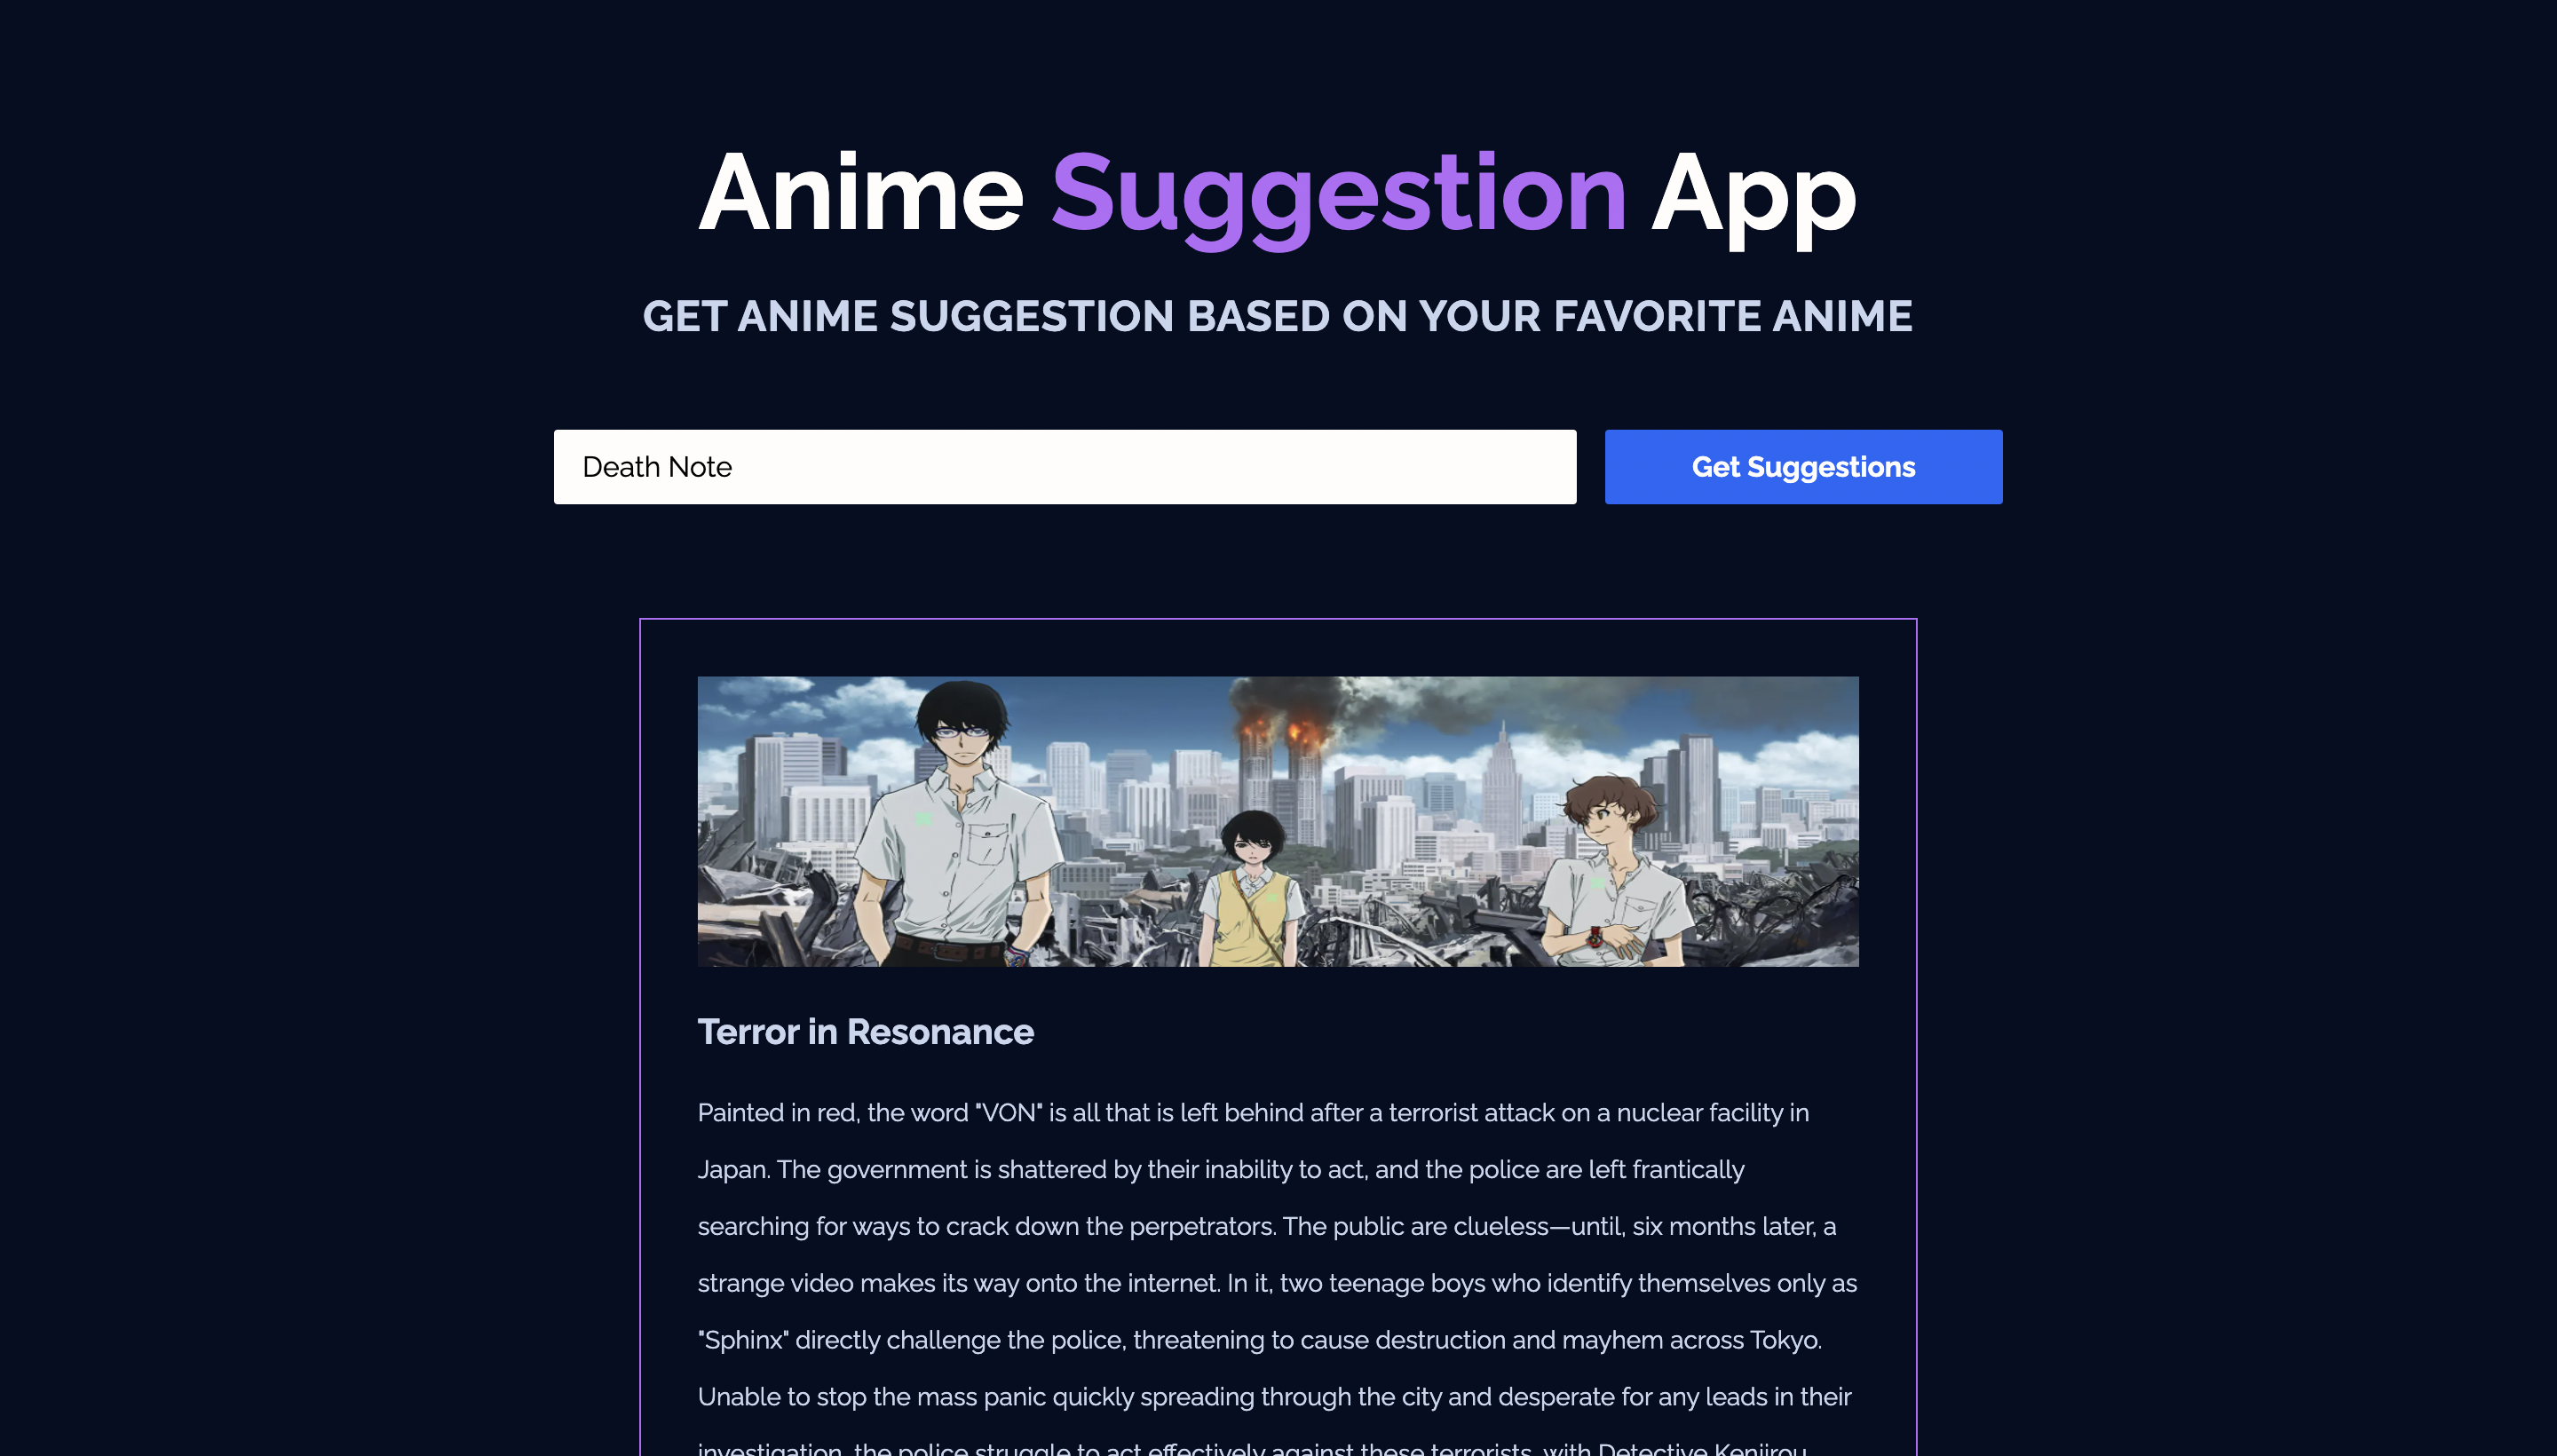 Anime Suggestion App built with Next.js and Anime Recommender API